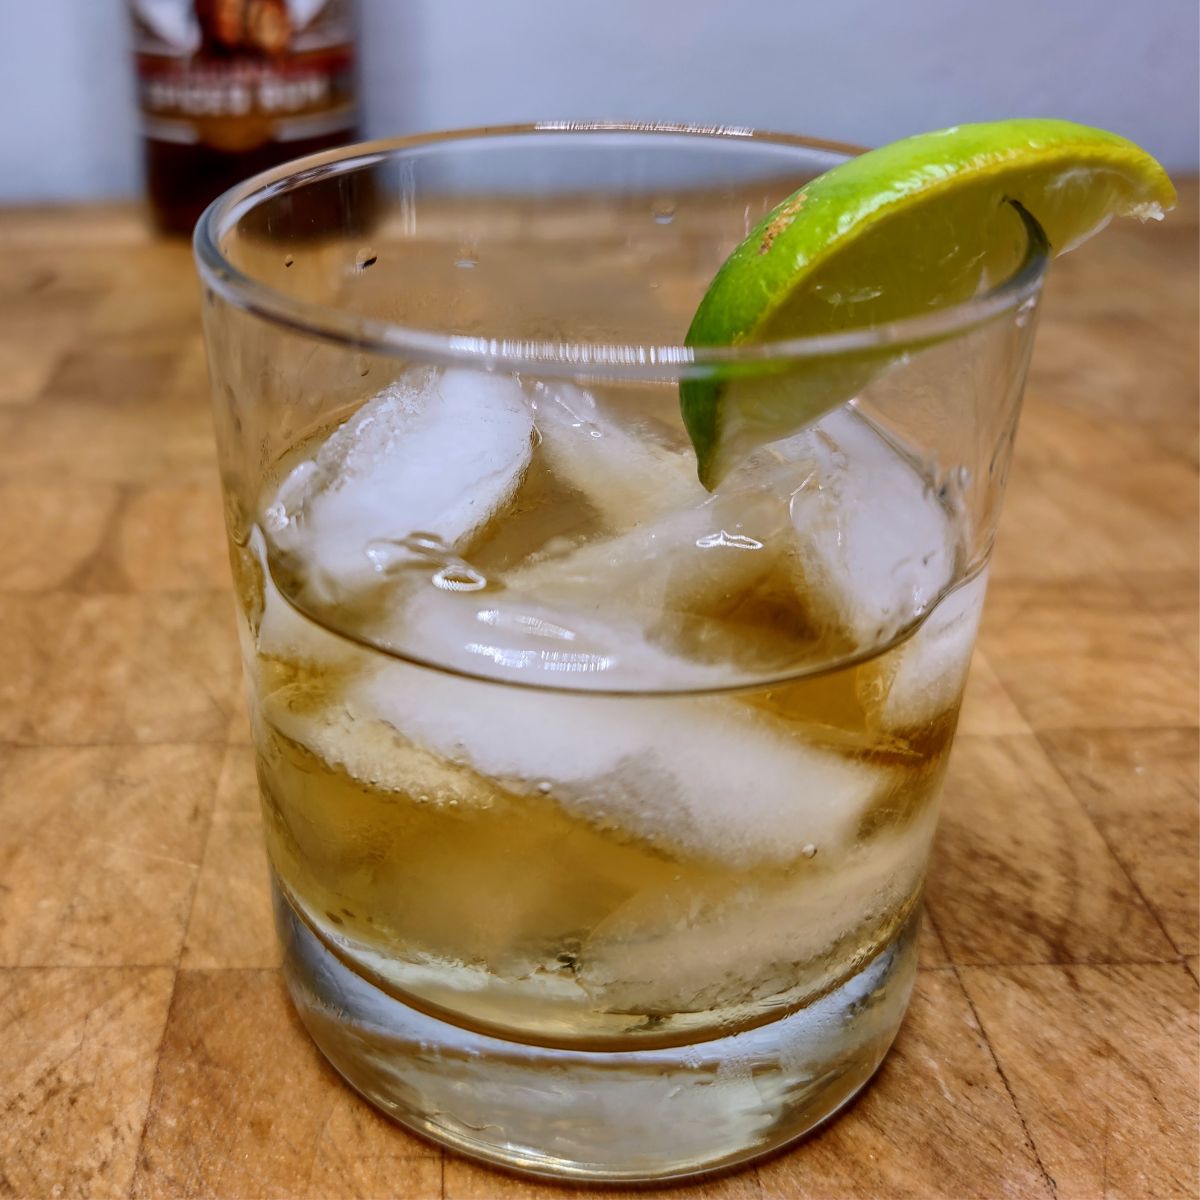 Rum on the rocks with a lime wedge on a wooden table.